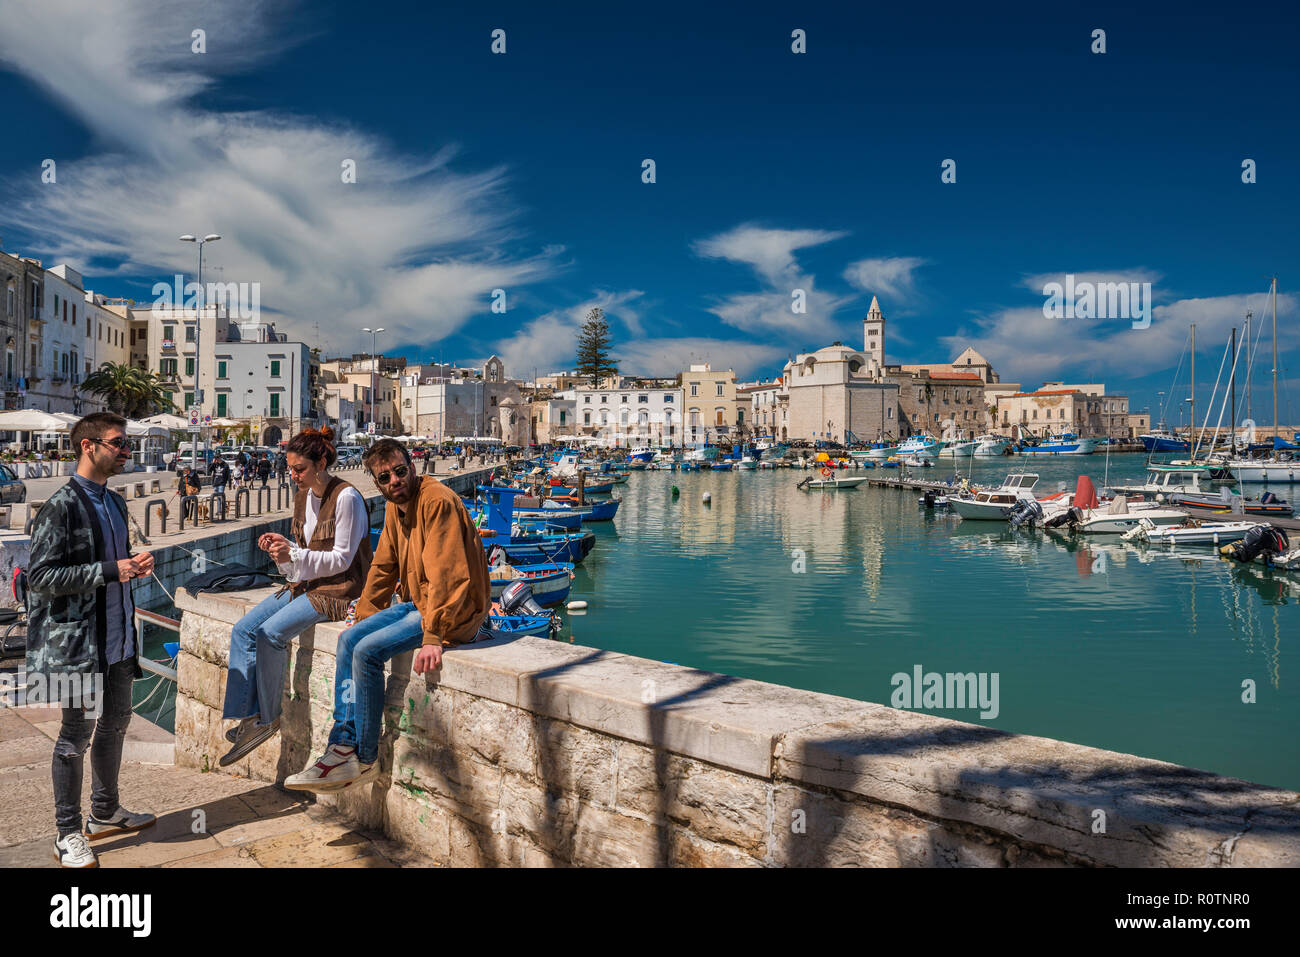 Group of friends at waterfront, historic center in distance, Trani, Apulia, Italy Stock Photo